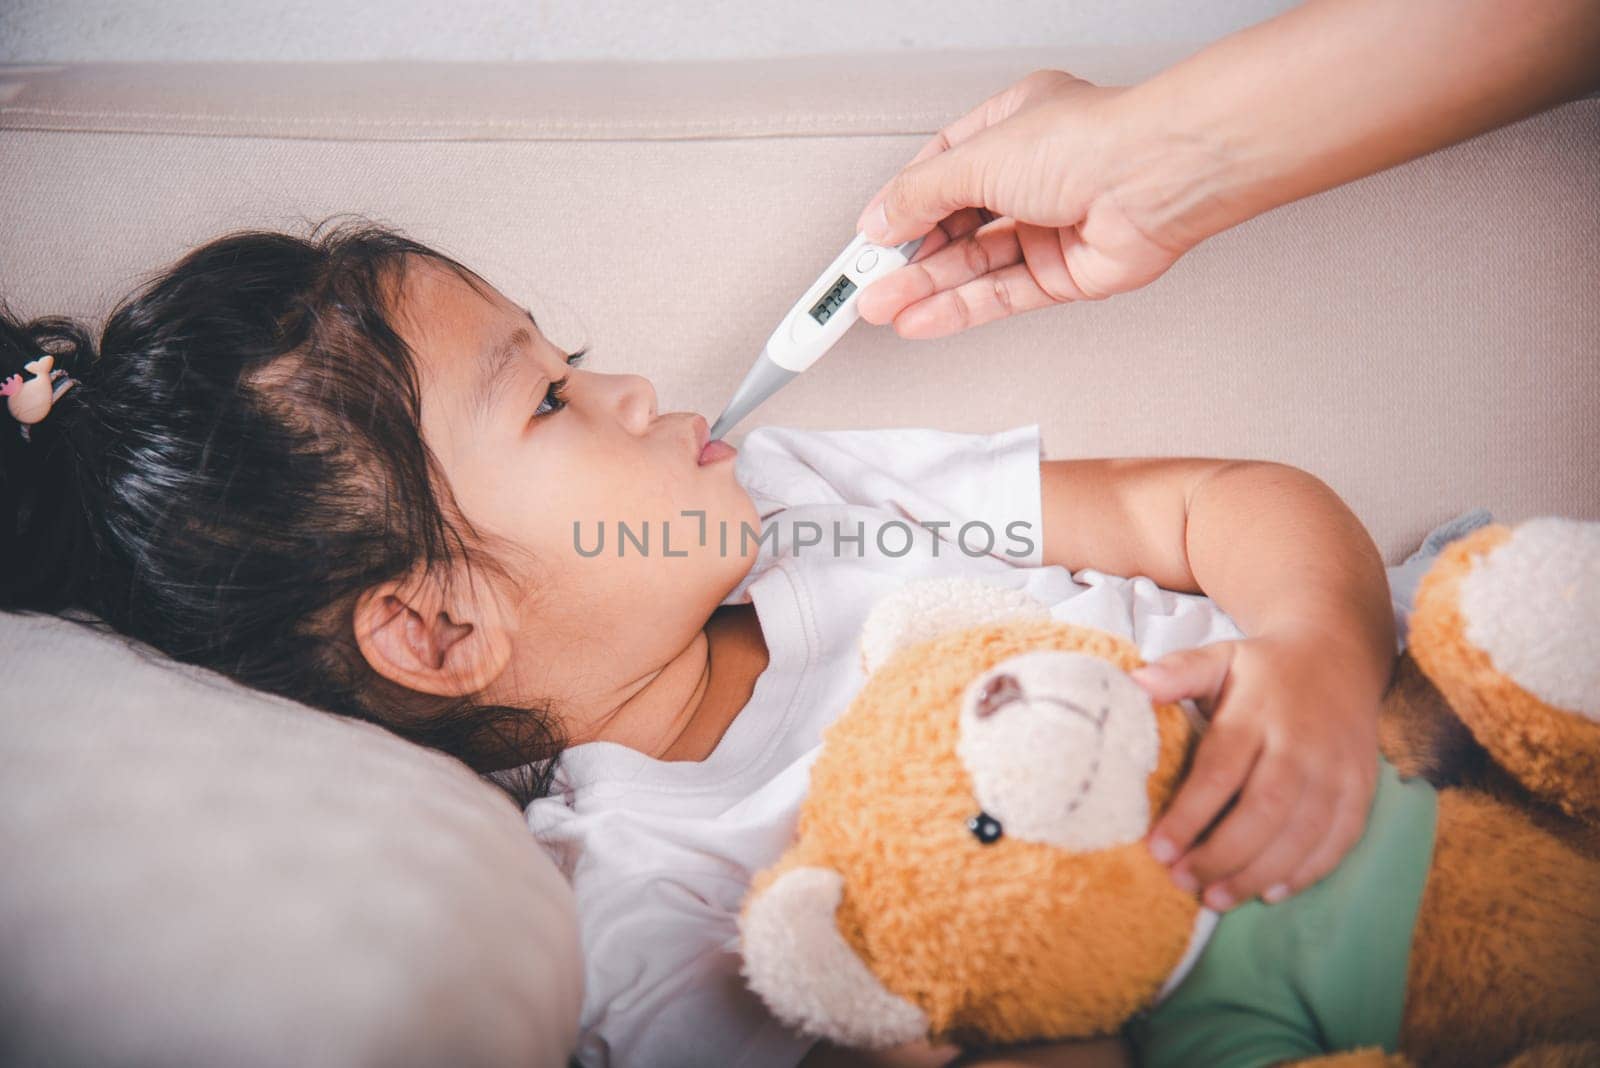 Sick kid. Mother parent checking temperature of her sick daughter with digital thermometer in mouth, child laying in bed taking measuring her temperature for fever and illness, healthcare